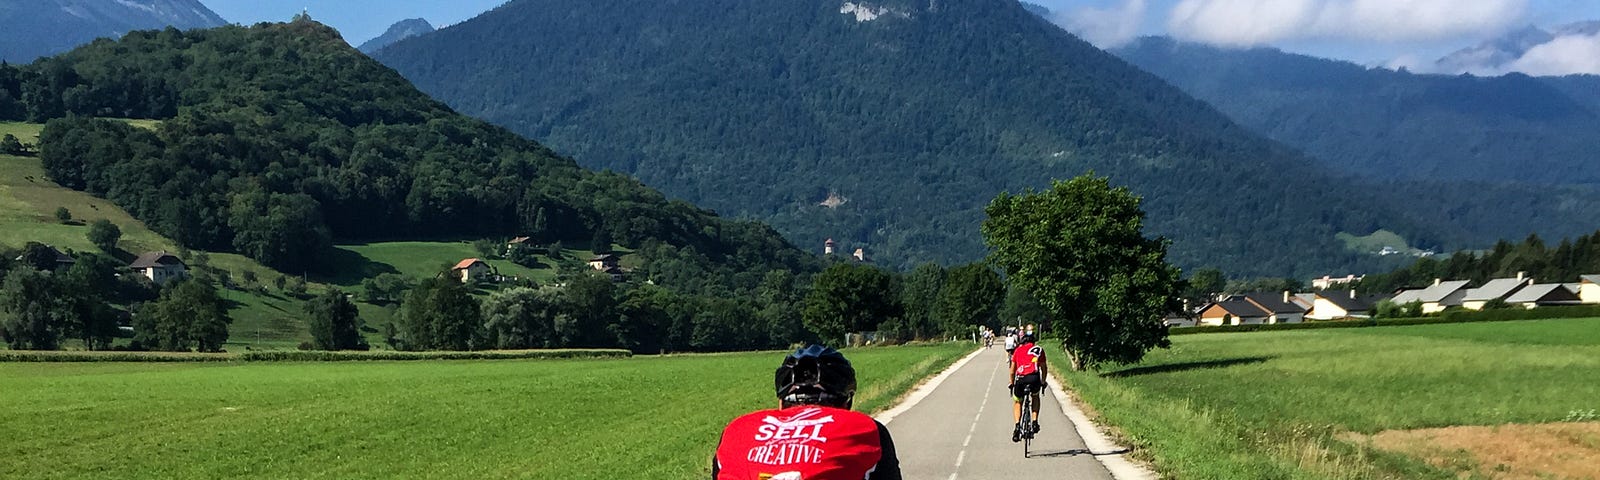 The author photographed this cyclist riding on the bike trail to Annecy, near the French Alps, in August 2015. A week later, the author participated in the Paris-Brest-Paris (PBP) ultra-distance bicycle ride (1,200 km distance and 90-hour time limit). Part of the PBP route that year followed the route of the 2015 Tour de France, held in July.